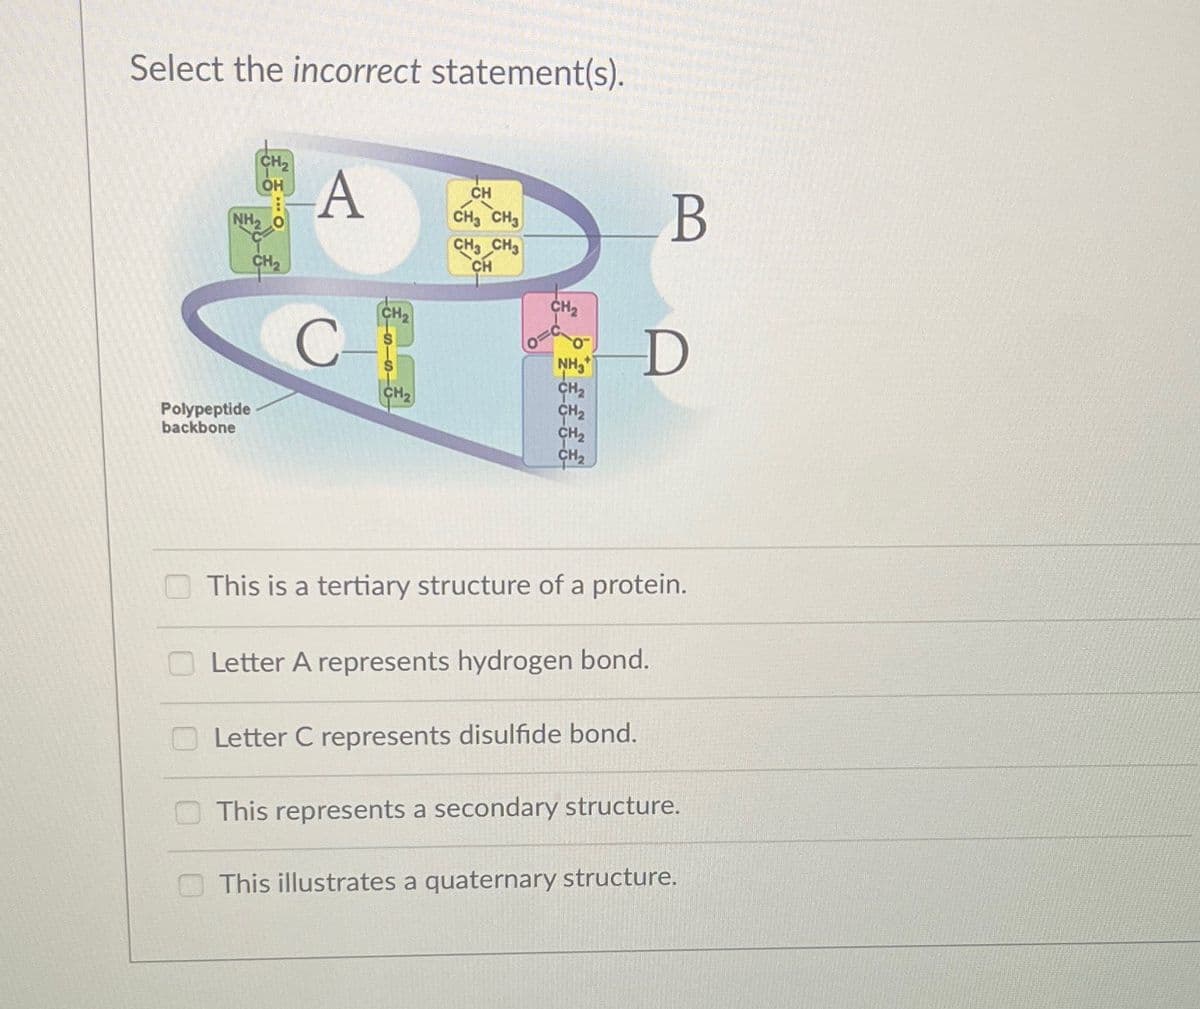 Select the incorrect statement(s).
CH₂
OH
NH₂
Polypeptide
backbone
CH₂
A
C-
CH₂
CH
CH3 CH3
CH3 CH3
CH
CH₂
NH₂
CH₂
CH₂
CH₂
CH₂
B
D
This is a tertiary structure of a protein.
Letter A represents hydrogen bond.
Letter C represents disulfide bond.
This represents a secondary structure.
This illustrates a quaternary structure.